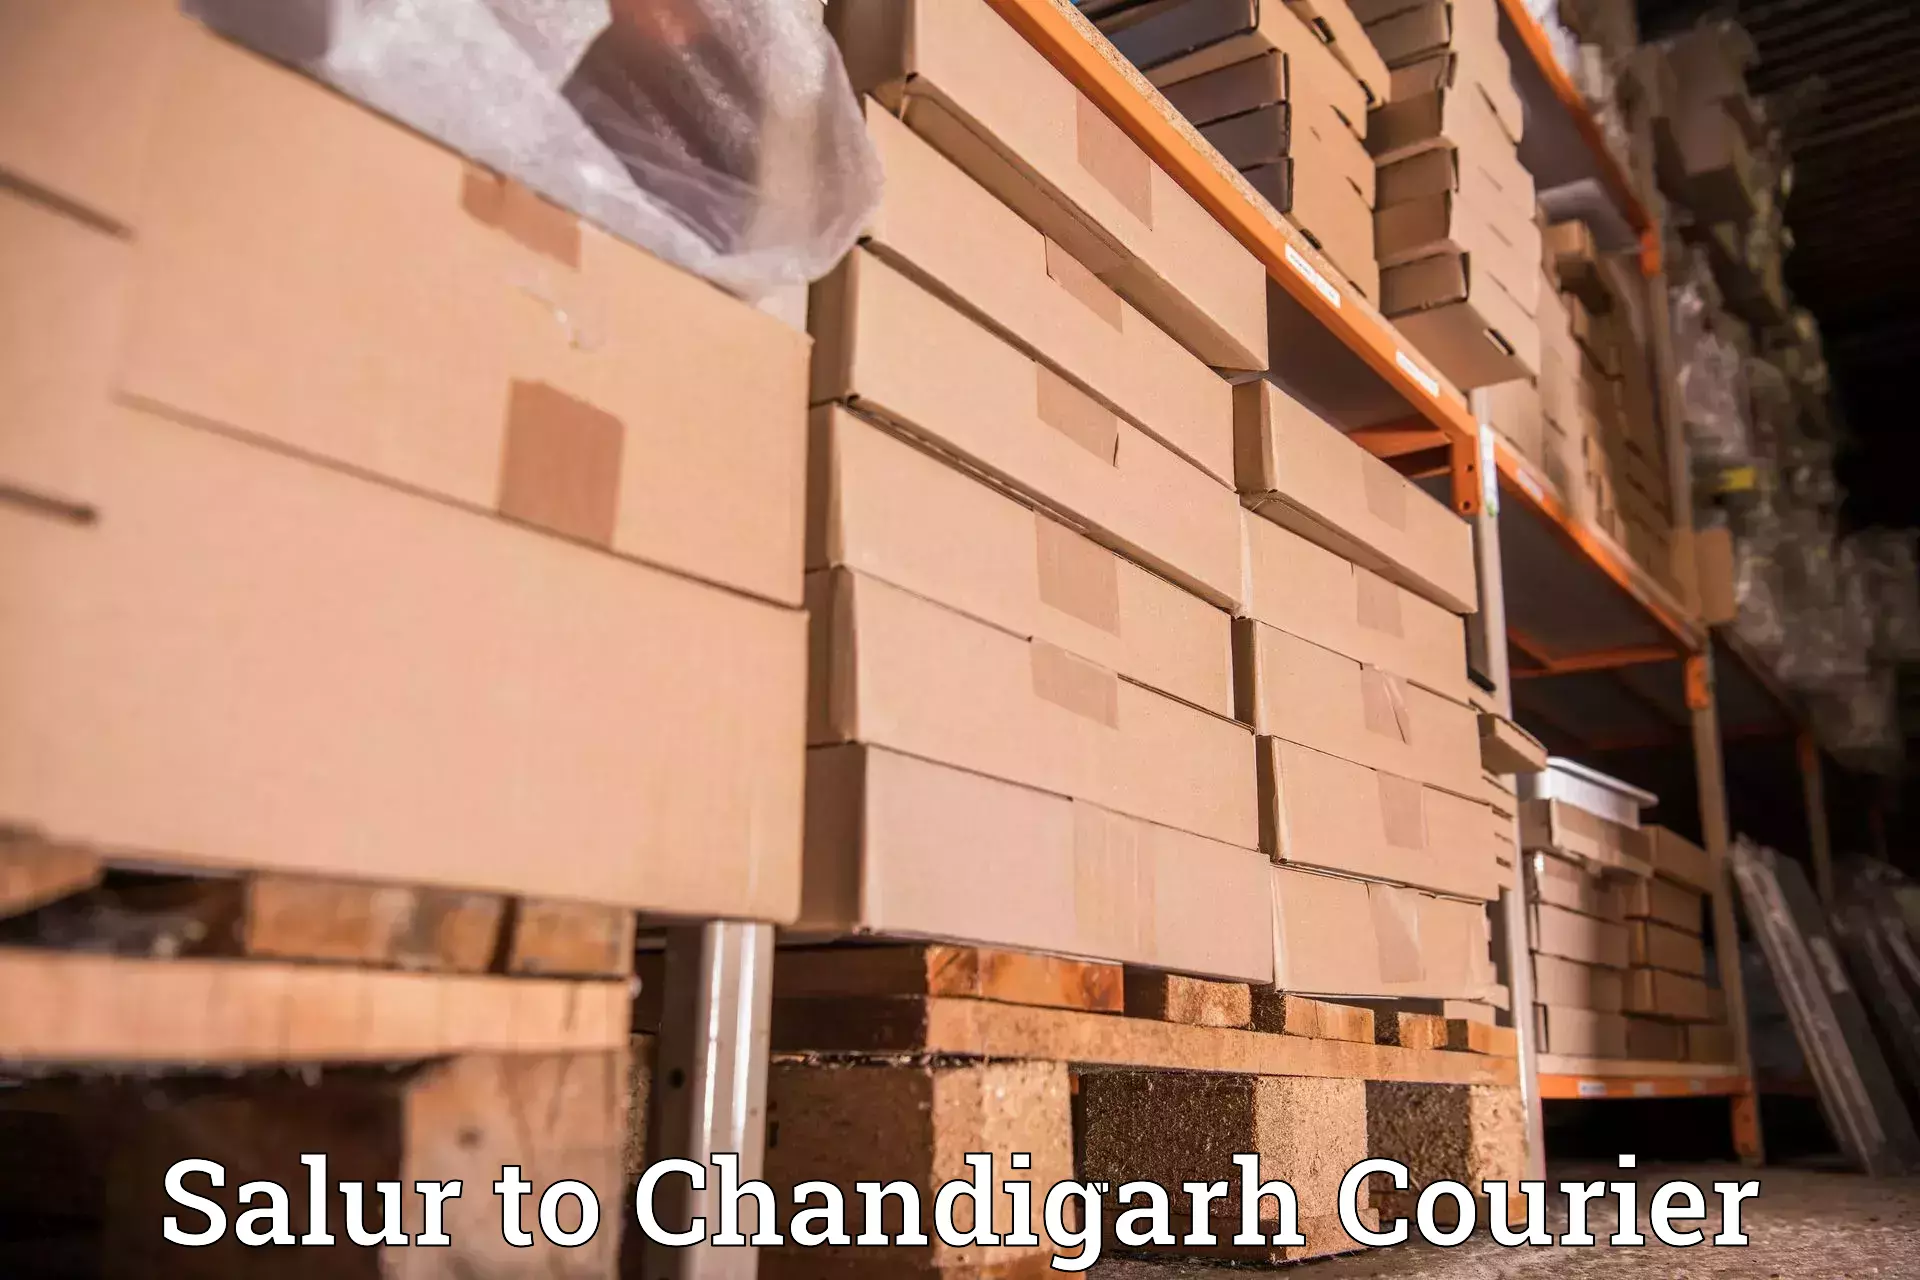 Pharmaceutical courier Salur to Chandigarh